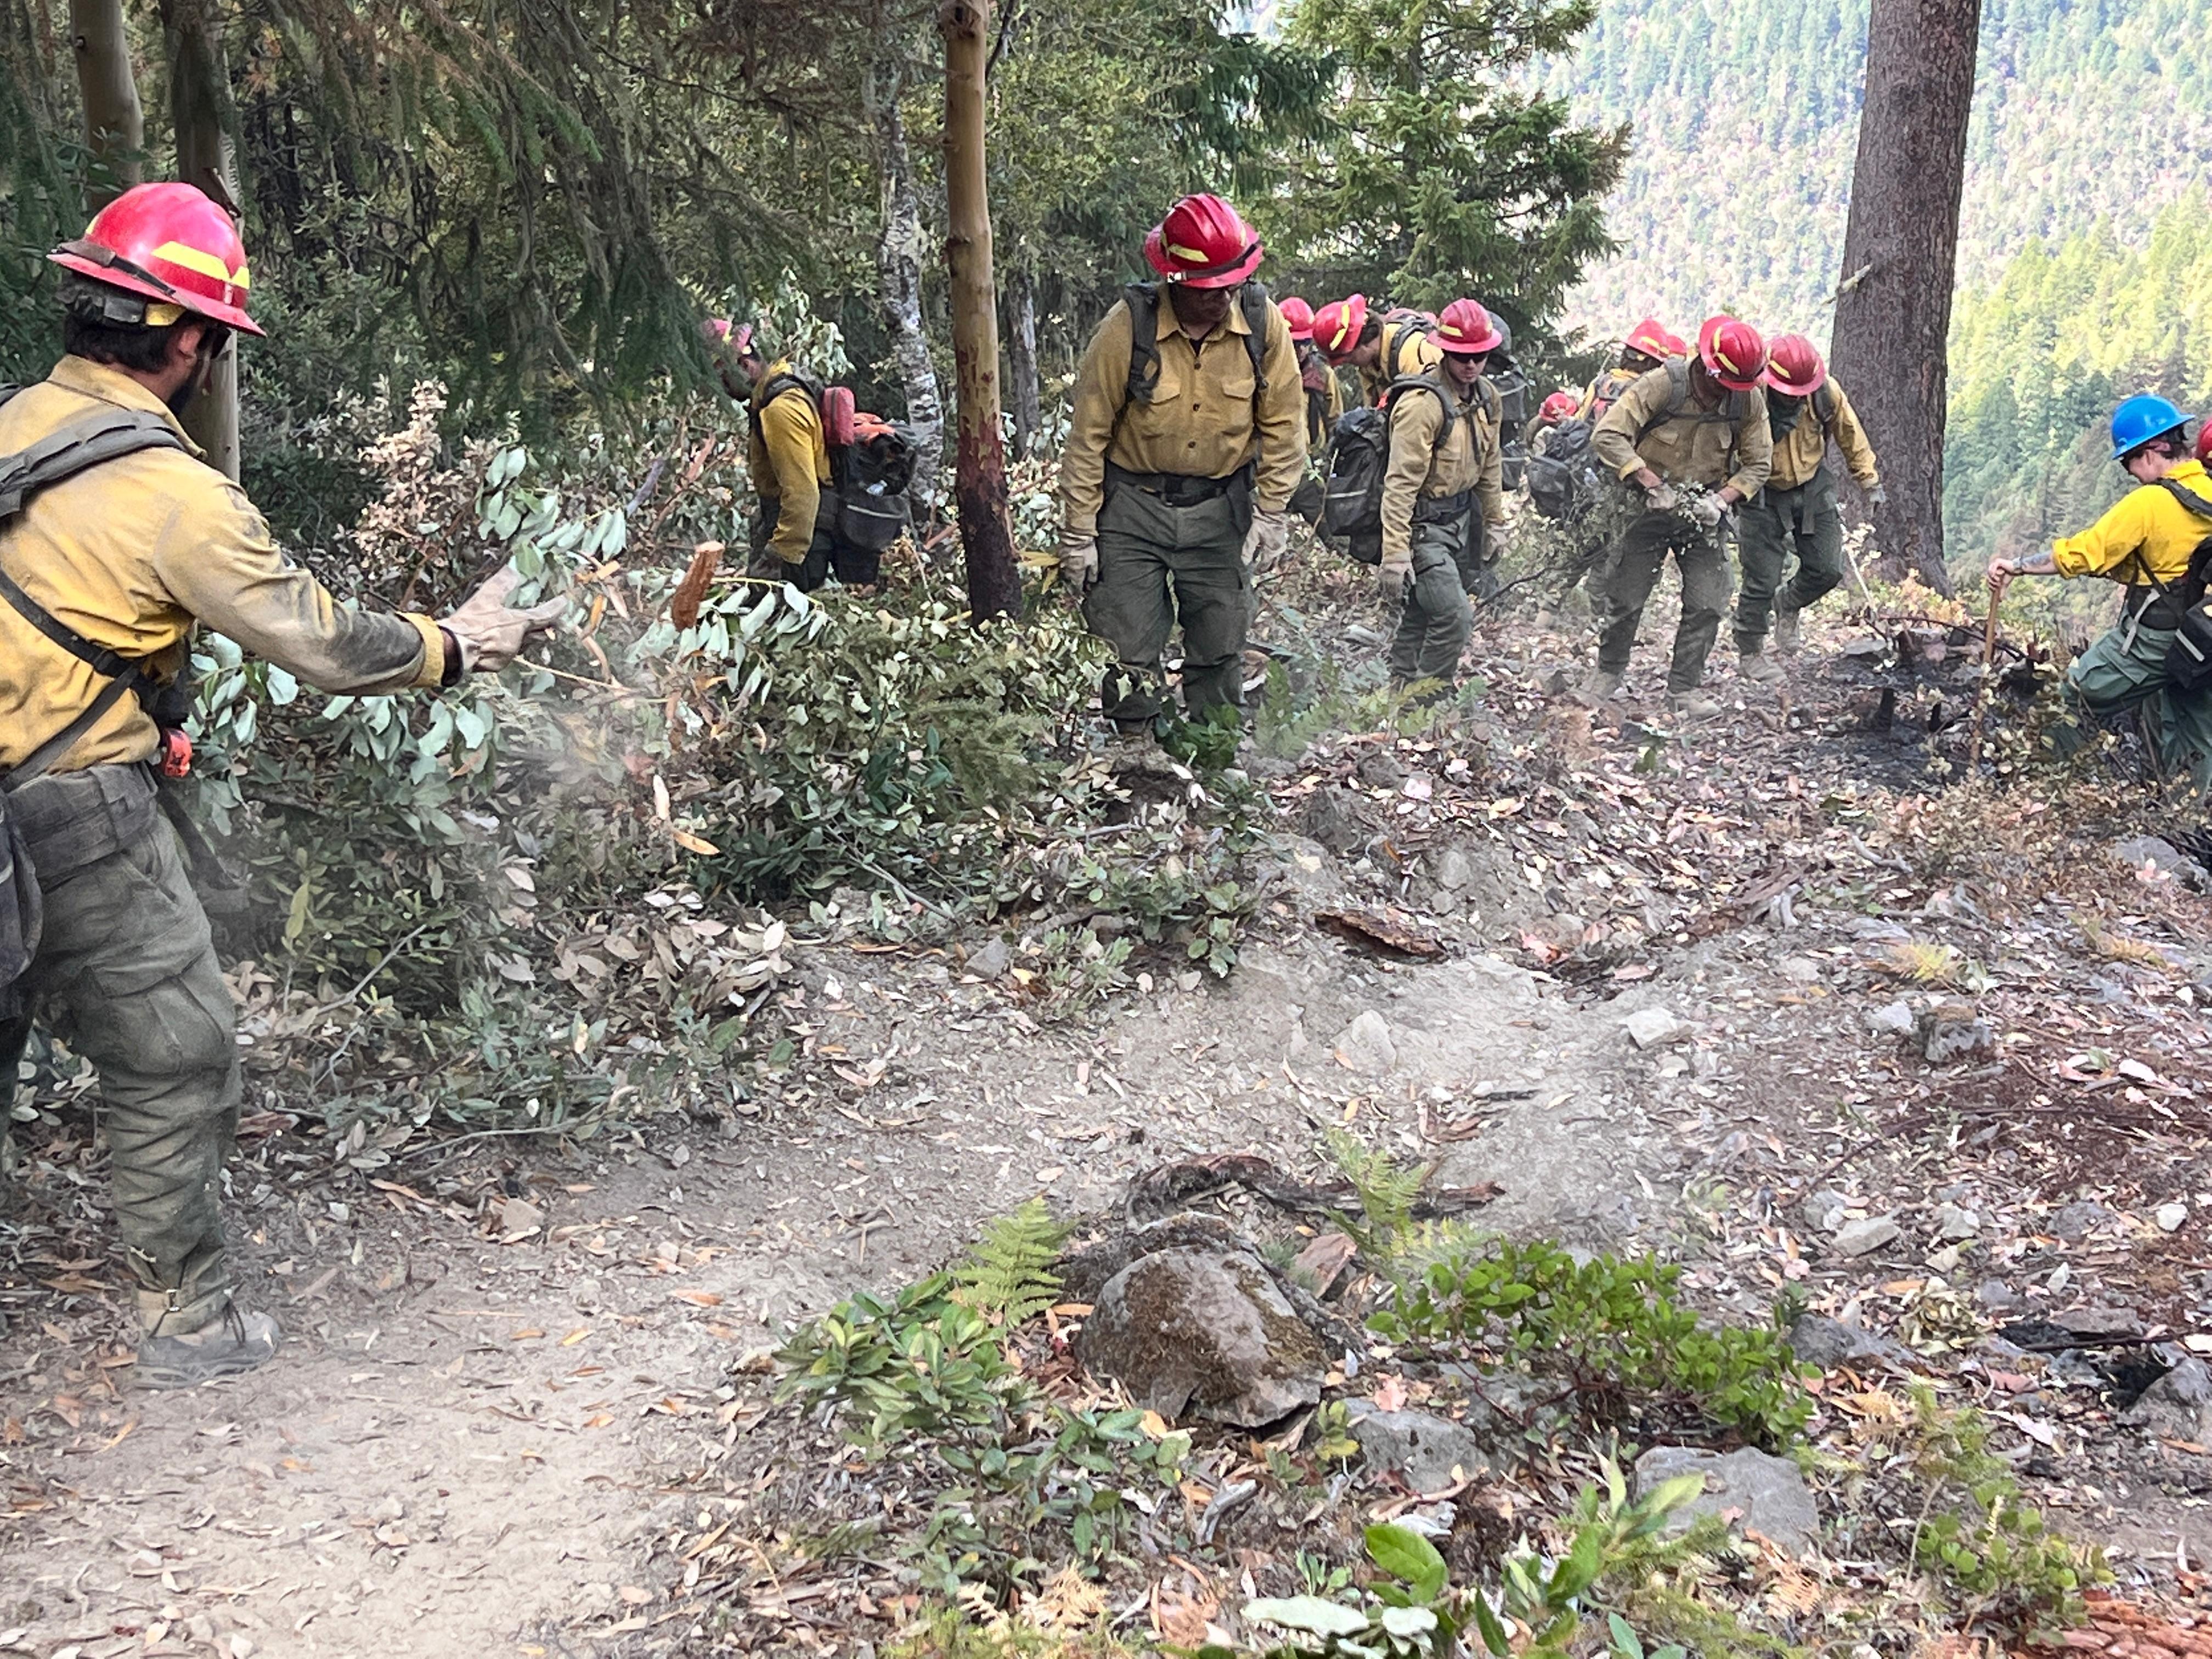 Firefighters constructing line and clearing brush